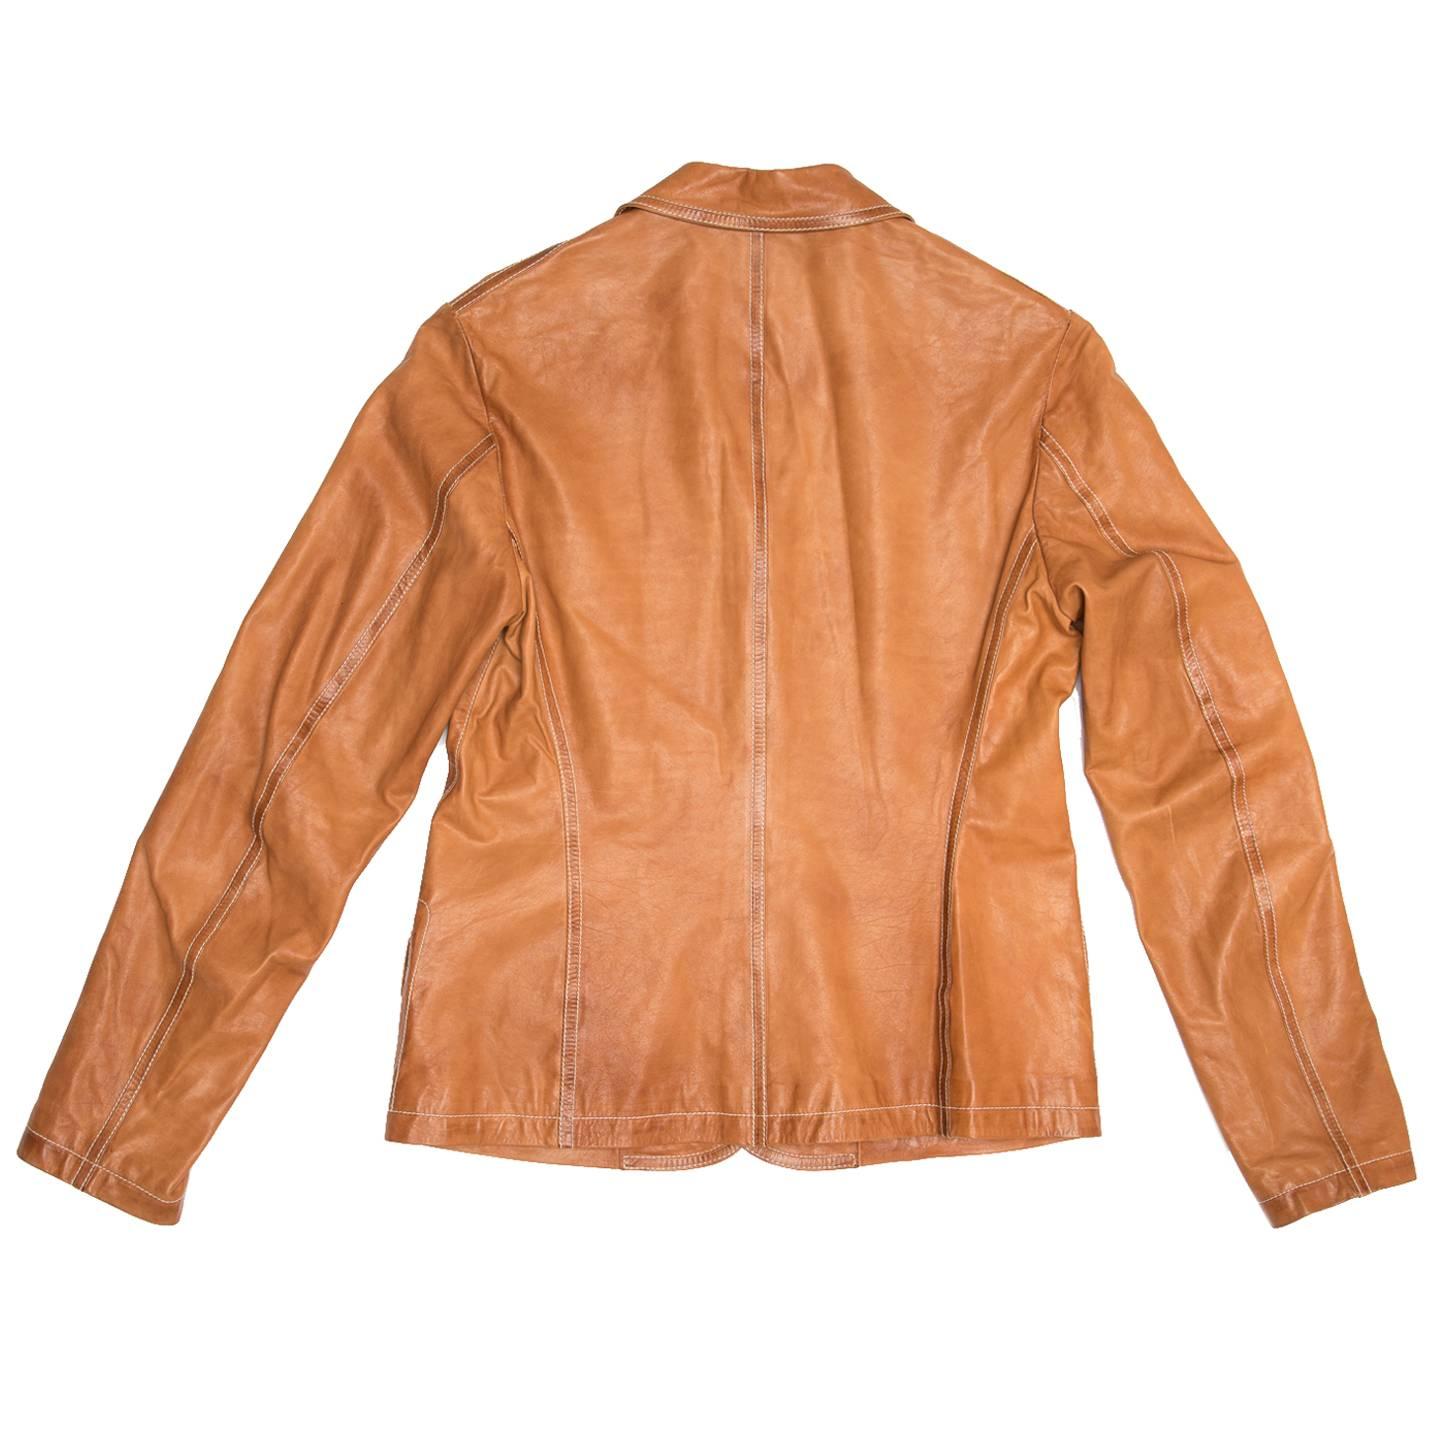 Jil Sander Tan Leather Blazer In Excellent Condition For Sale In Brooklyn, NY